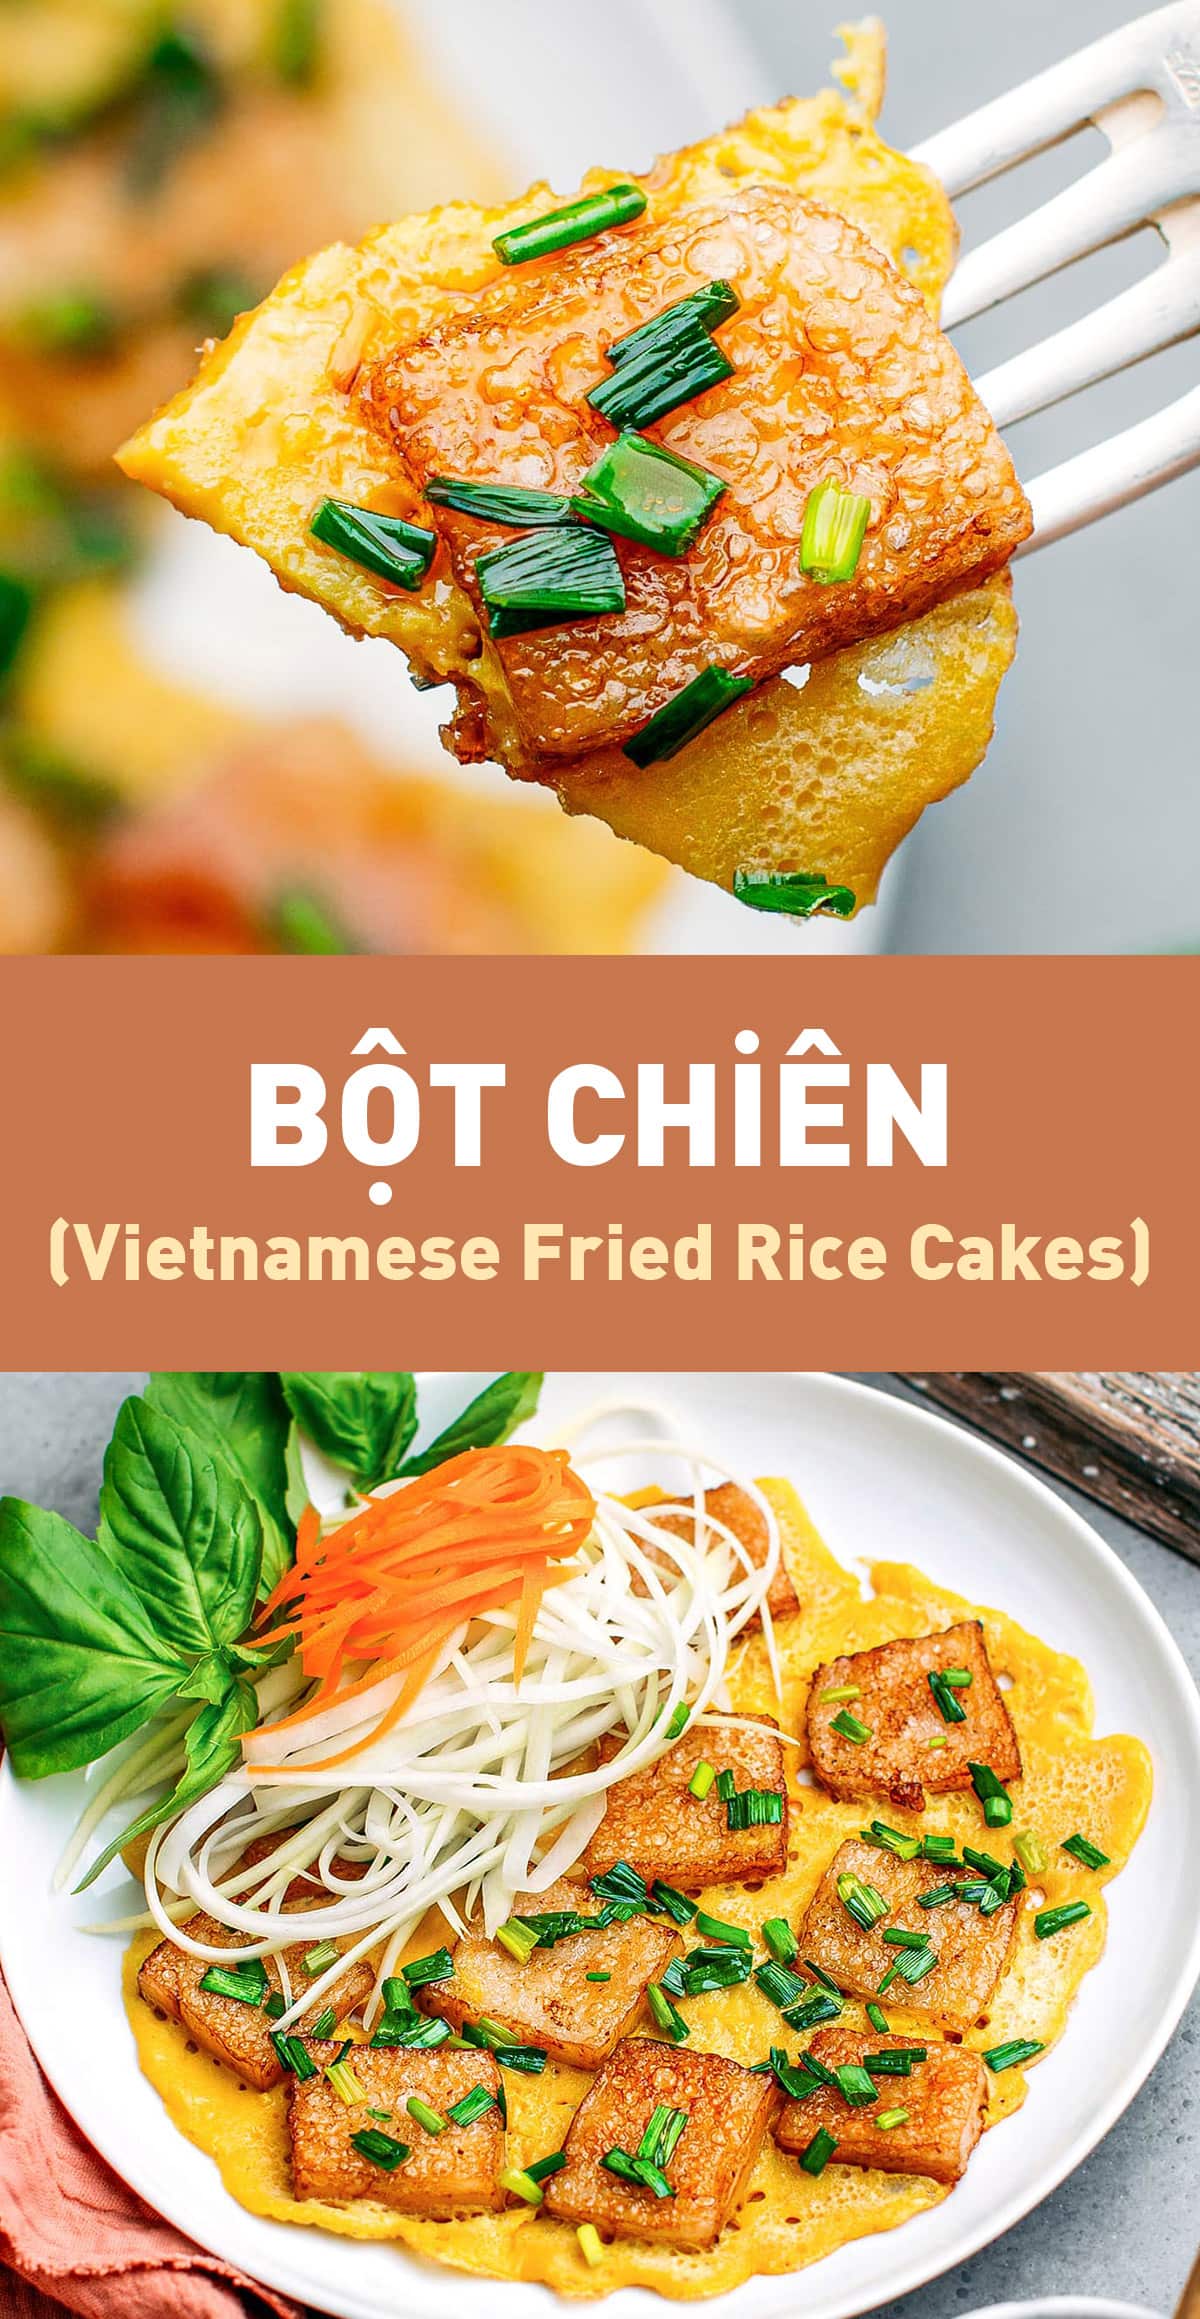 Bột chiên is a traditional Vietnamese dish that features crispy fried rice cakes with omelet, green onions, shredded green papaya, and pickles. It's a unique dish that is packed with bold flavors! #vietnamesefood #vegan